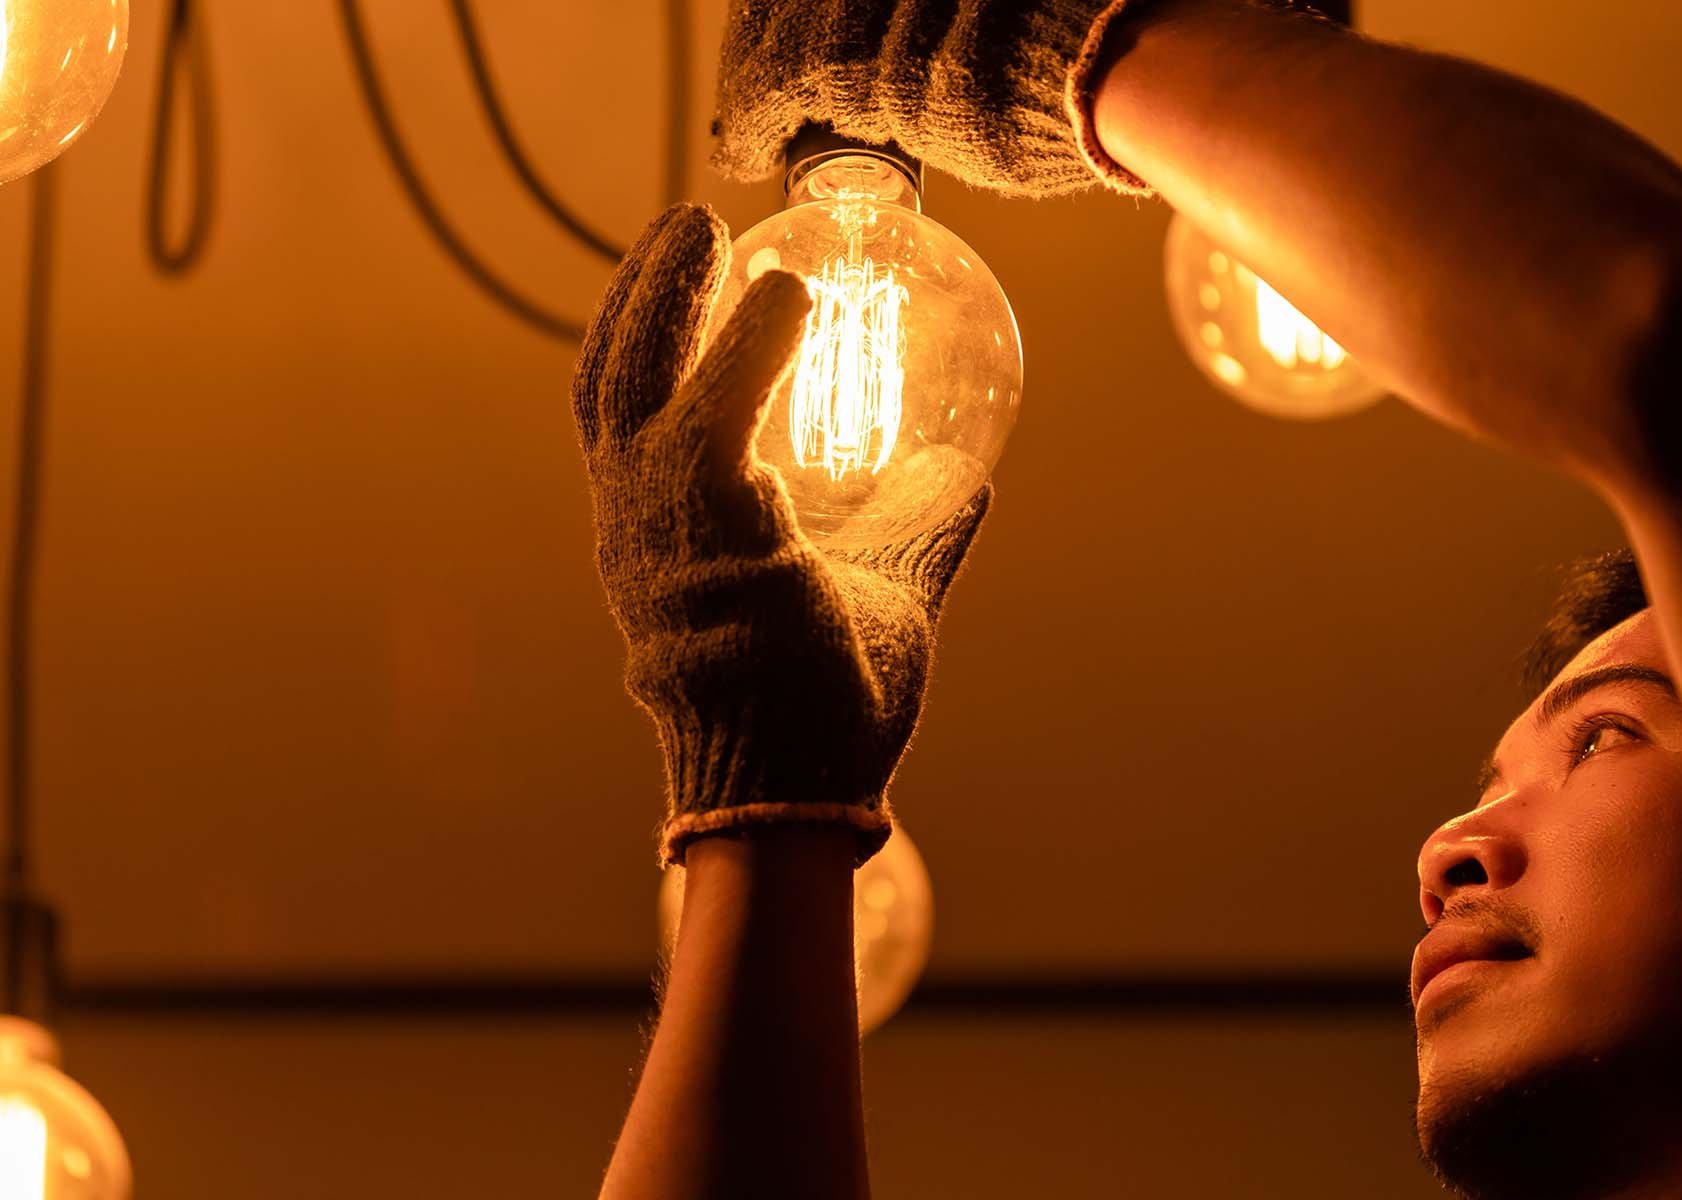 A person in gloves changing a glowing light bulb